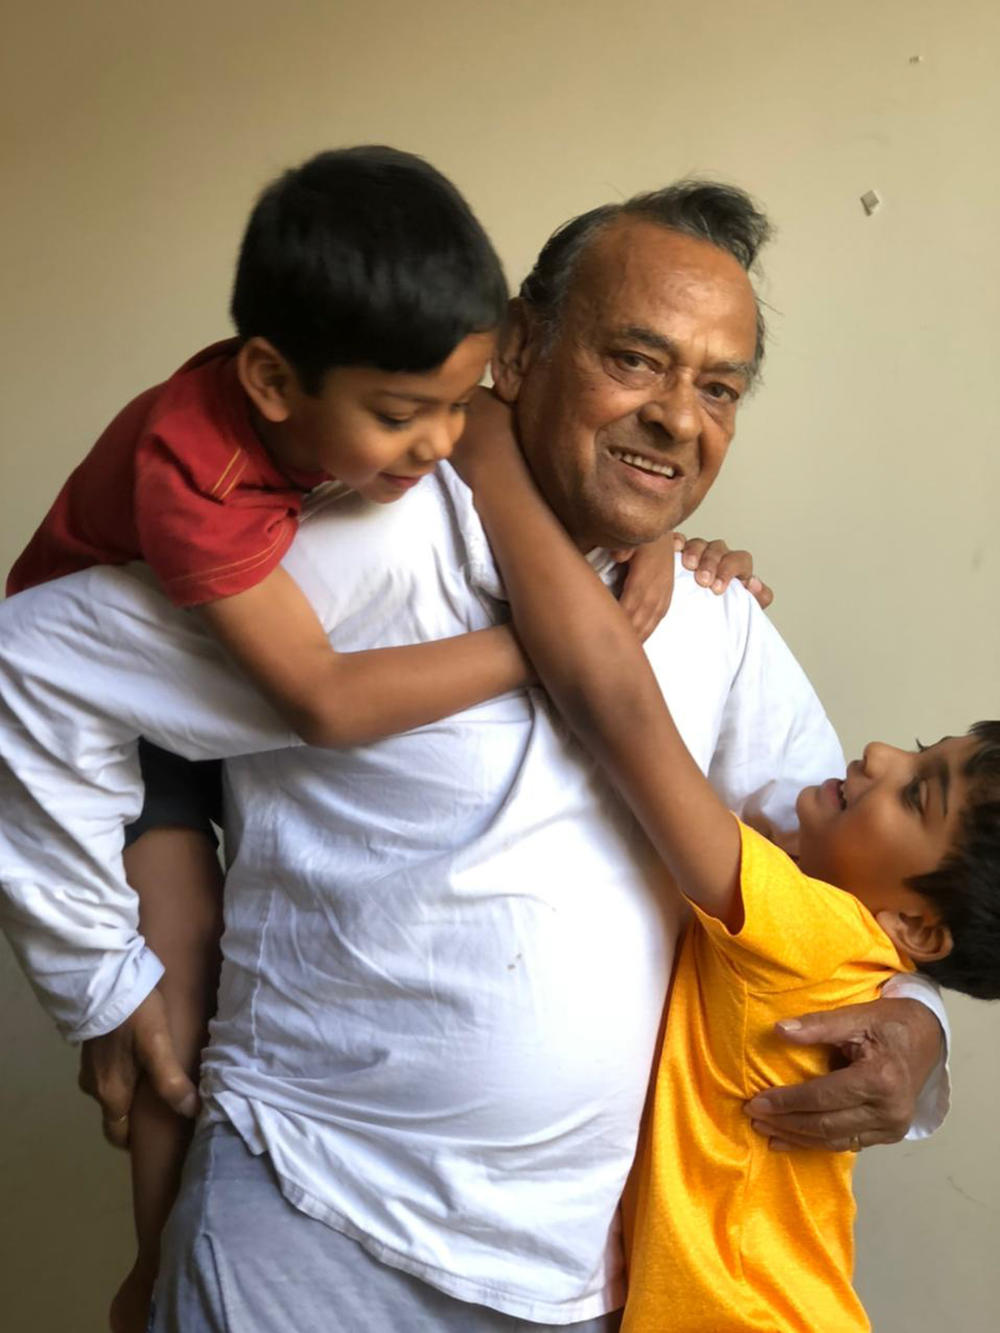 Sudheer Kumar Pradhan with his grandchildren in an undated family photo. He died of COVID-19 on April 21.